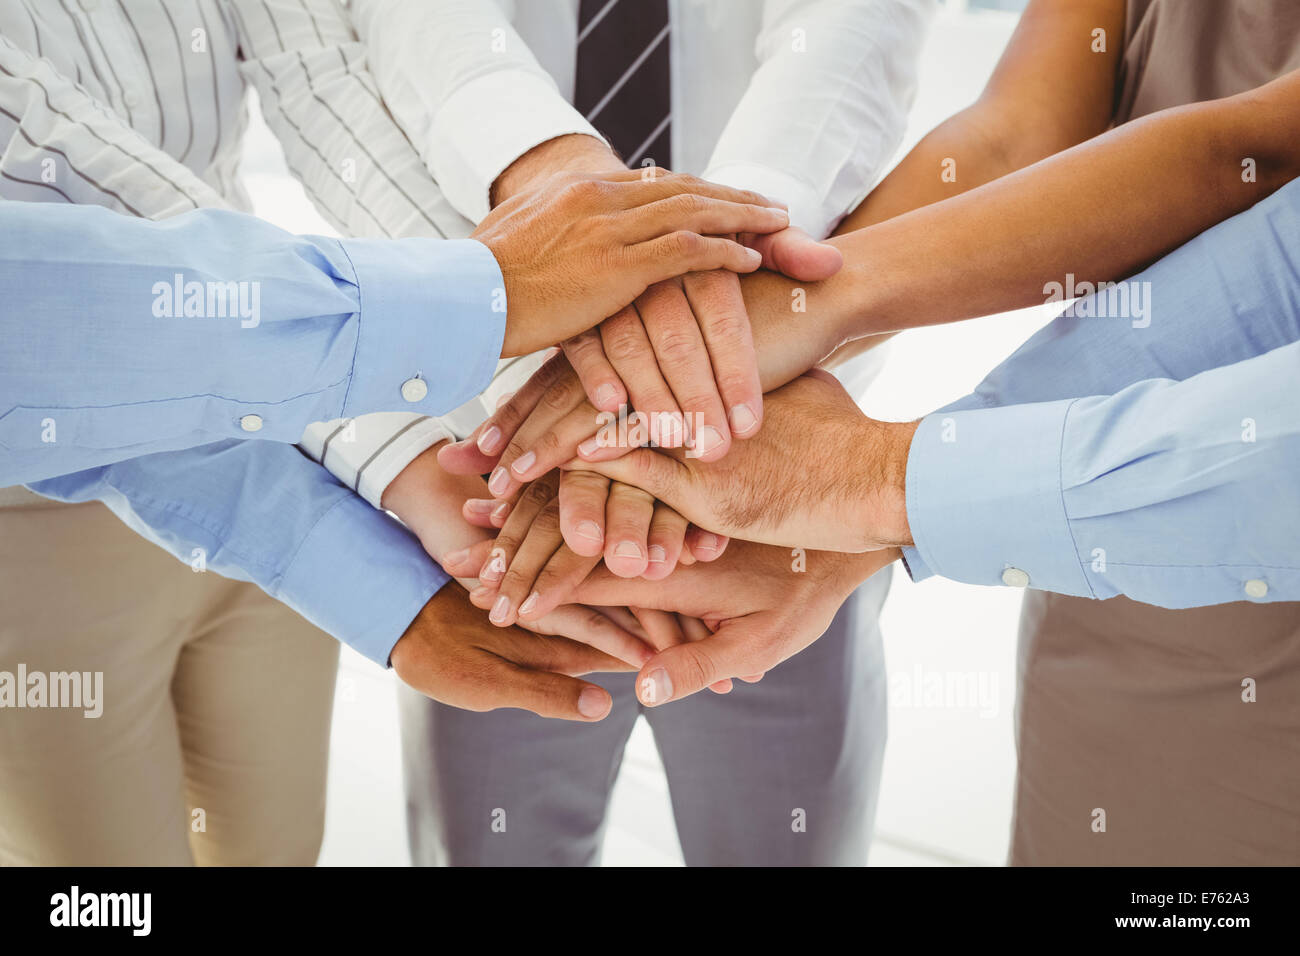 Employees putting hands together Stock Photo